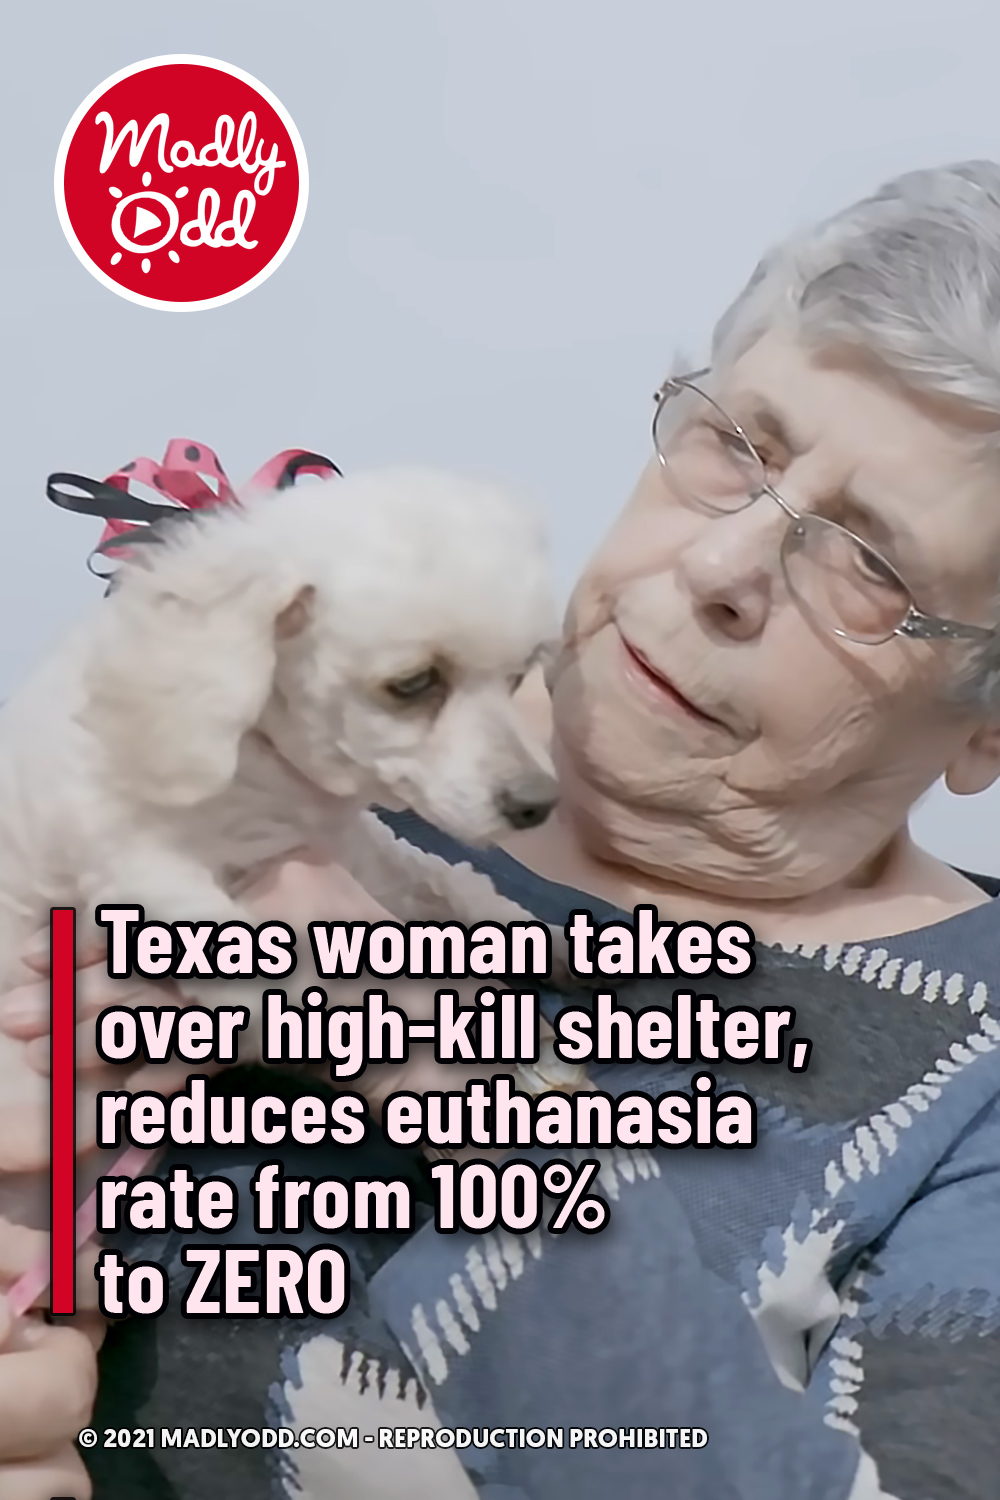 Texas woman takes over high-kill shelter, reduces euthanasia rate from 100% to ZERO